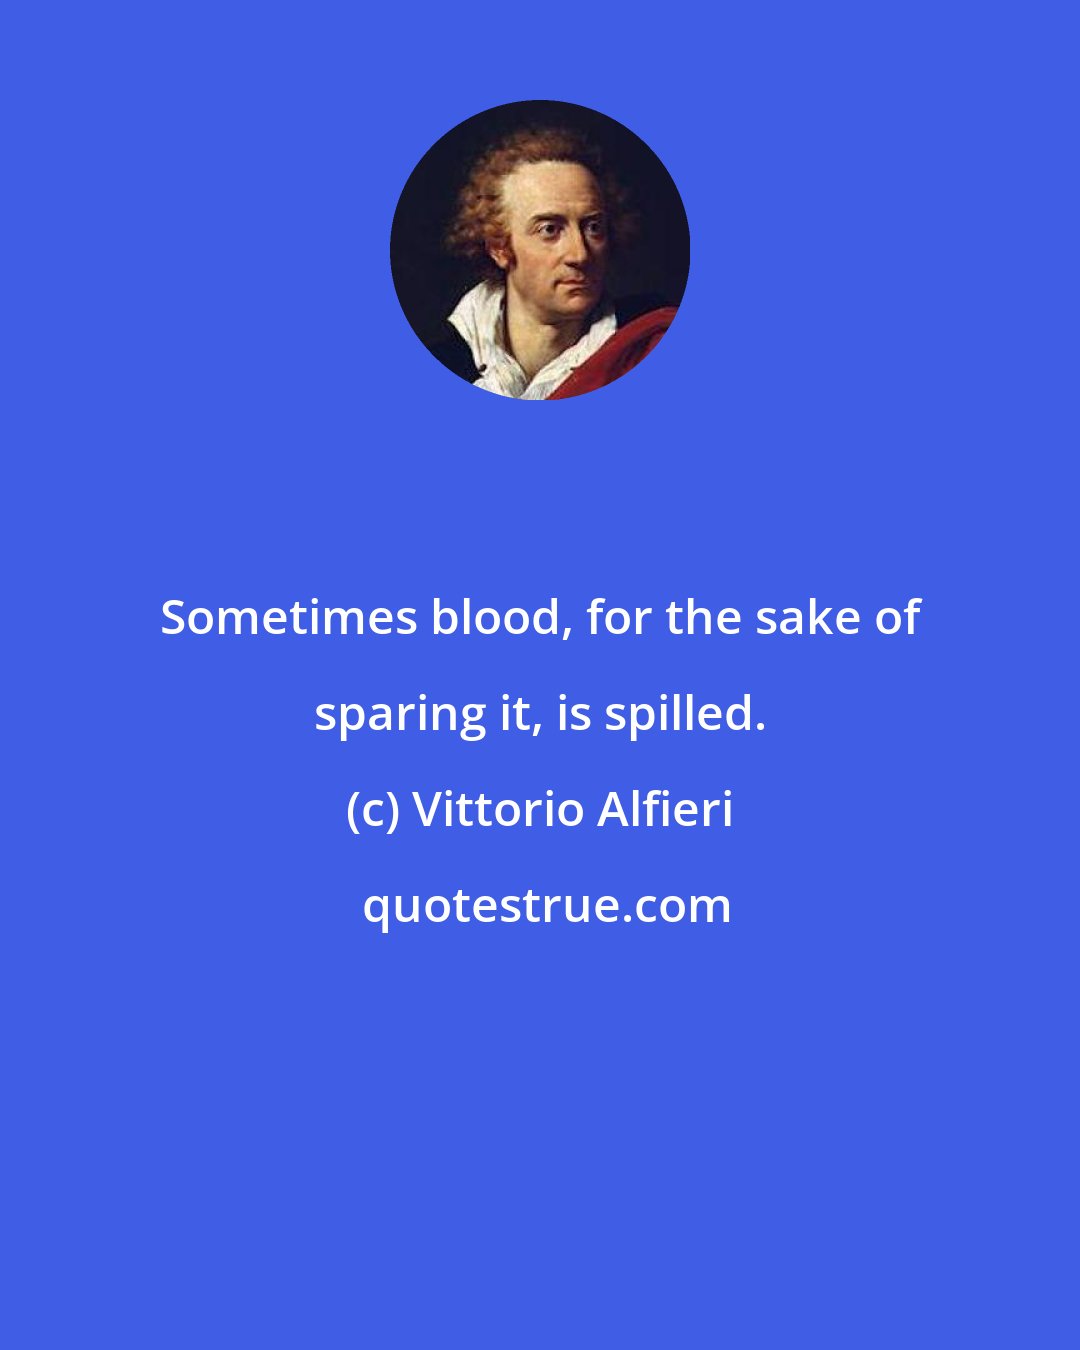 Vittorio Alfieri: Sometimes blood, for the sake of sparing it, is spilled.